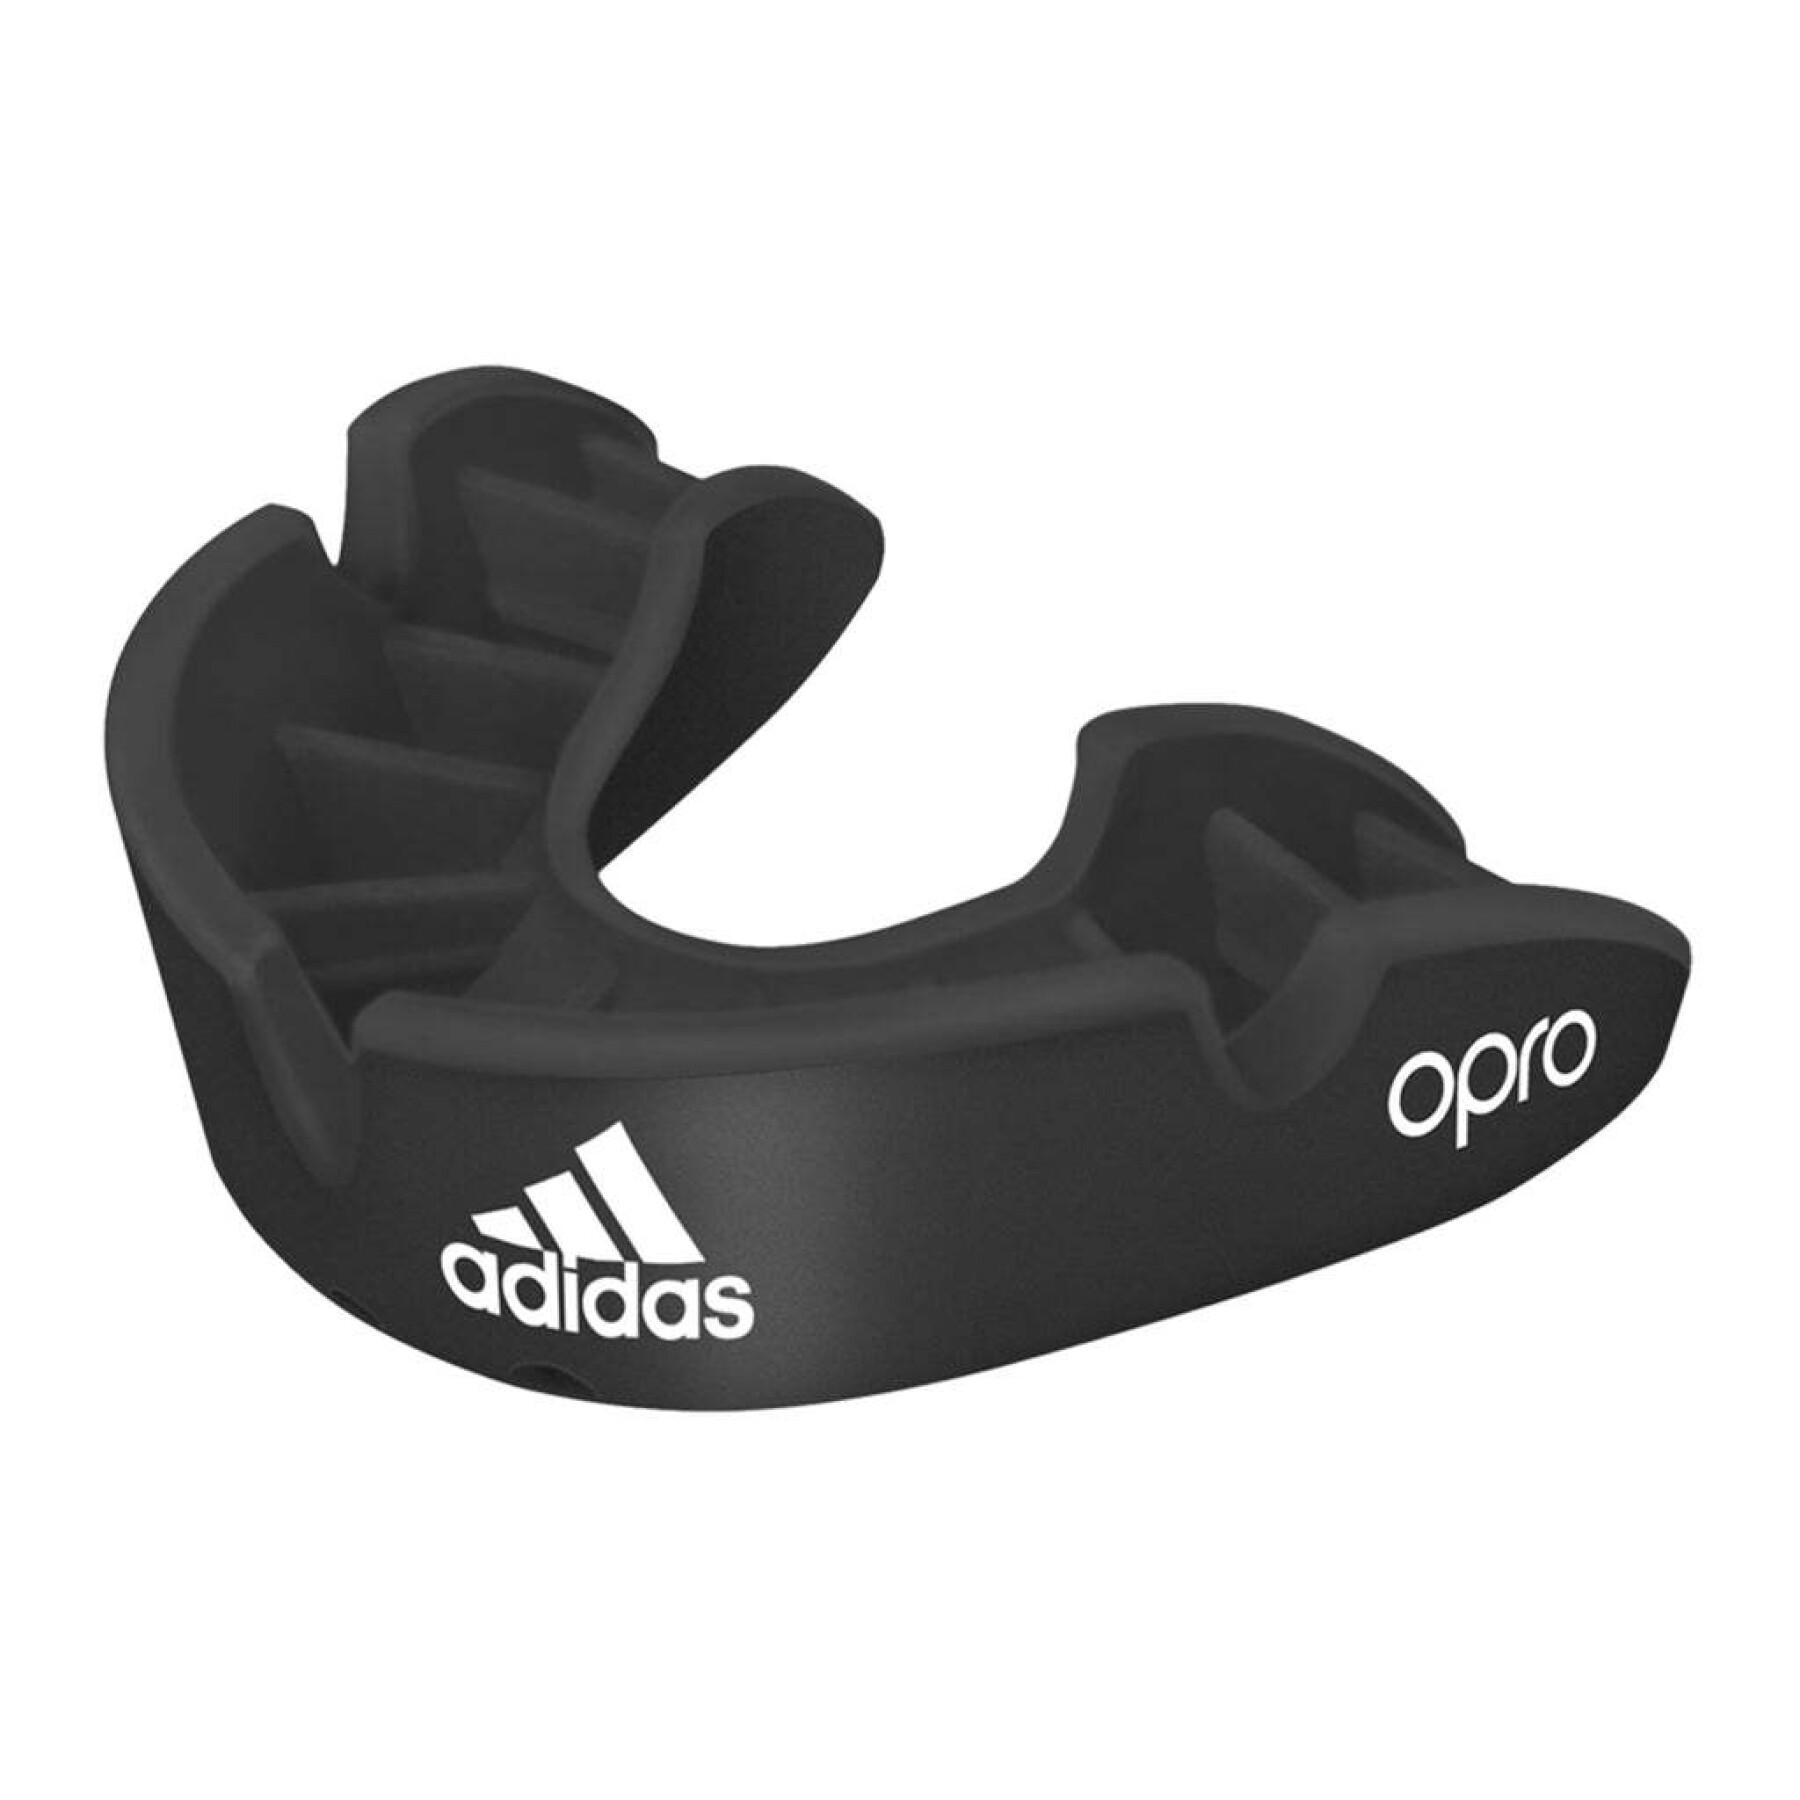 Children's mouth guard adidas Opro